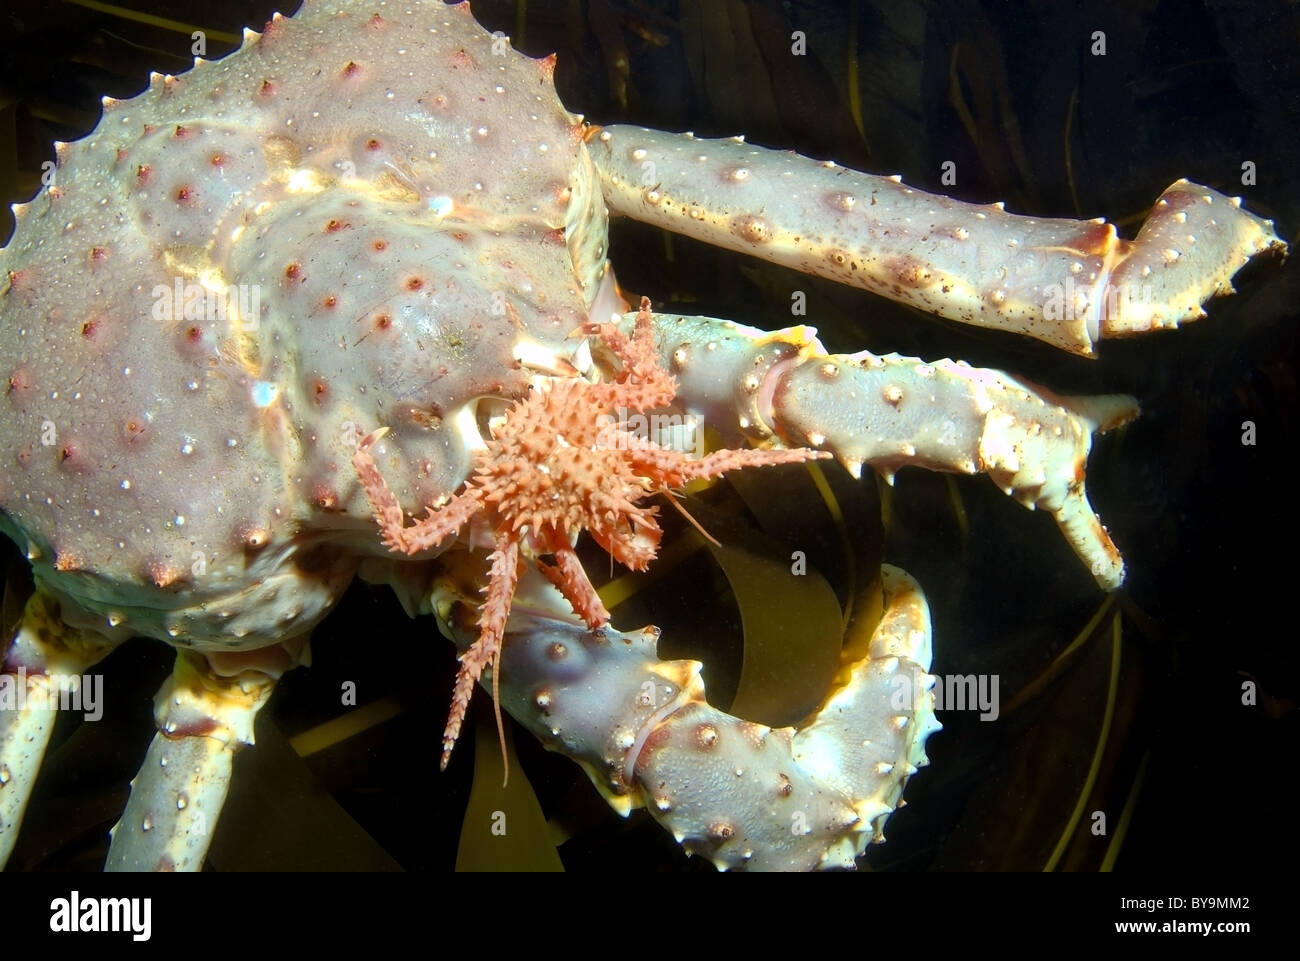 Red King Crab (Paralithodes cantschaticus) Stockfoto